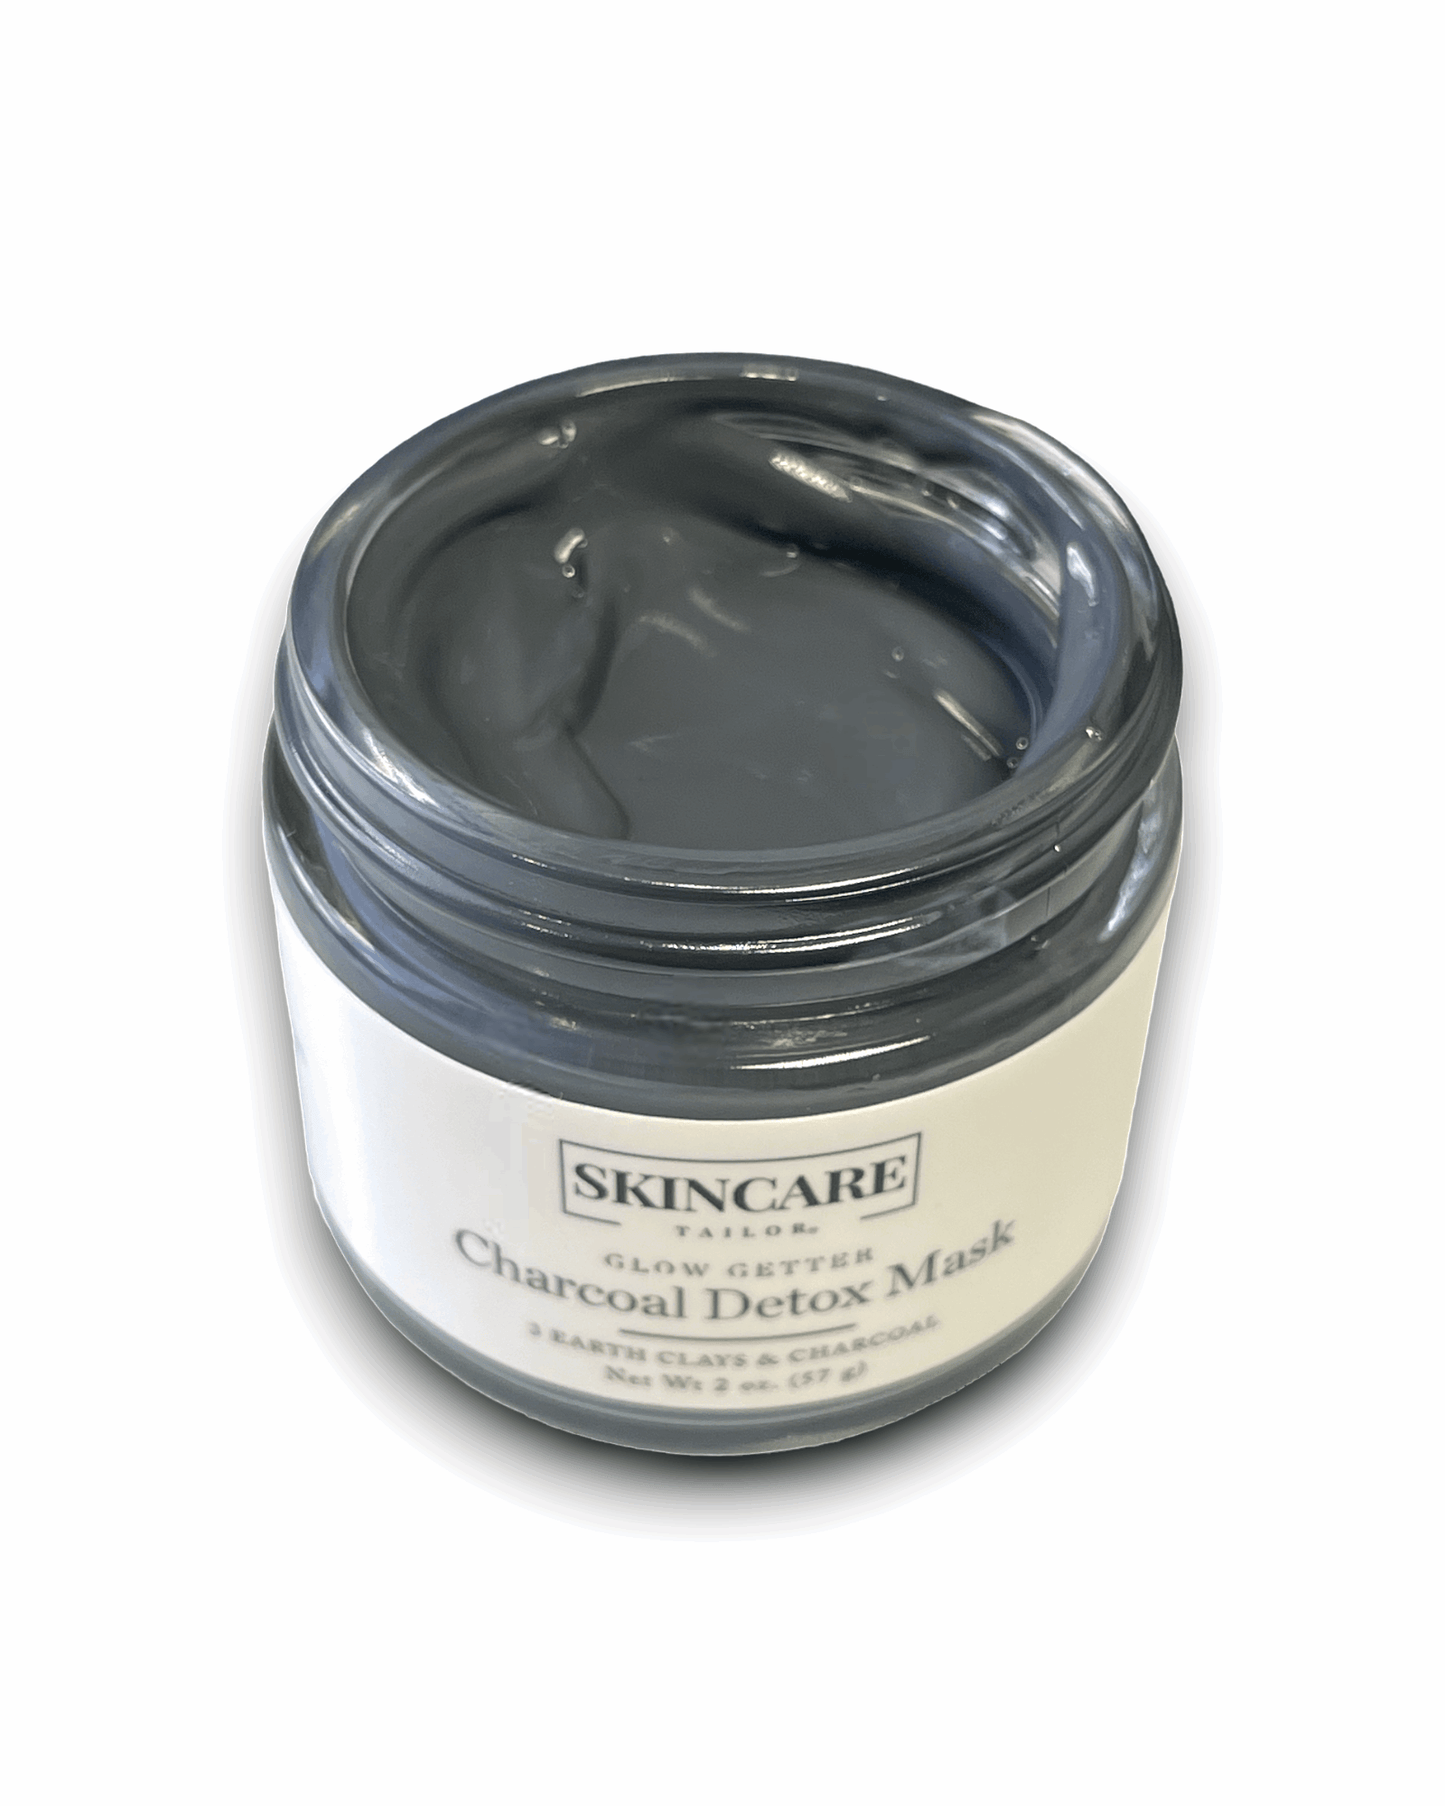 Glow Getter Charcoal Detox Mask | Volcanic Clay Mask | Skincare Tailor